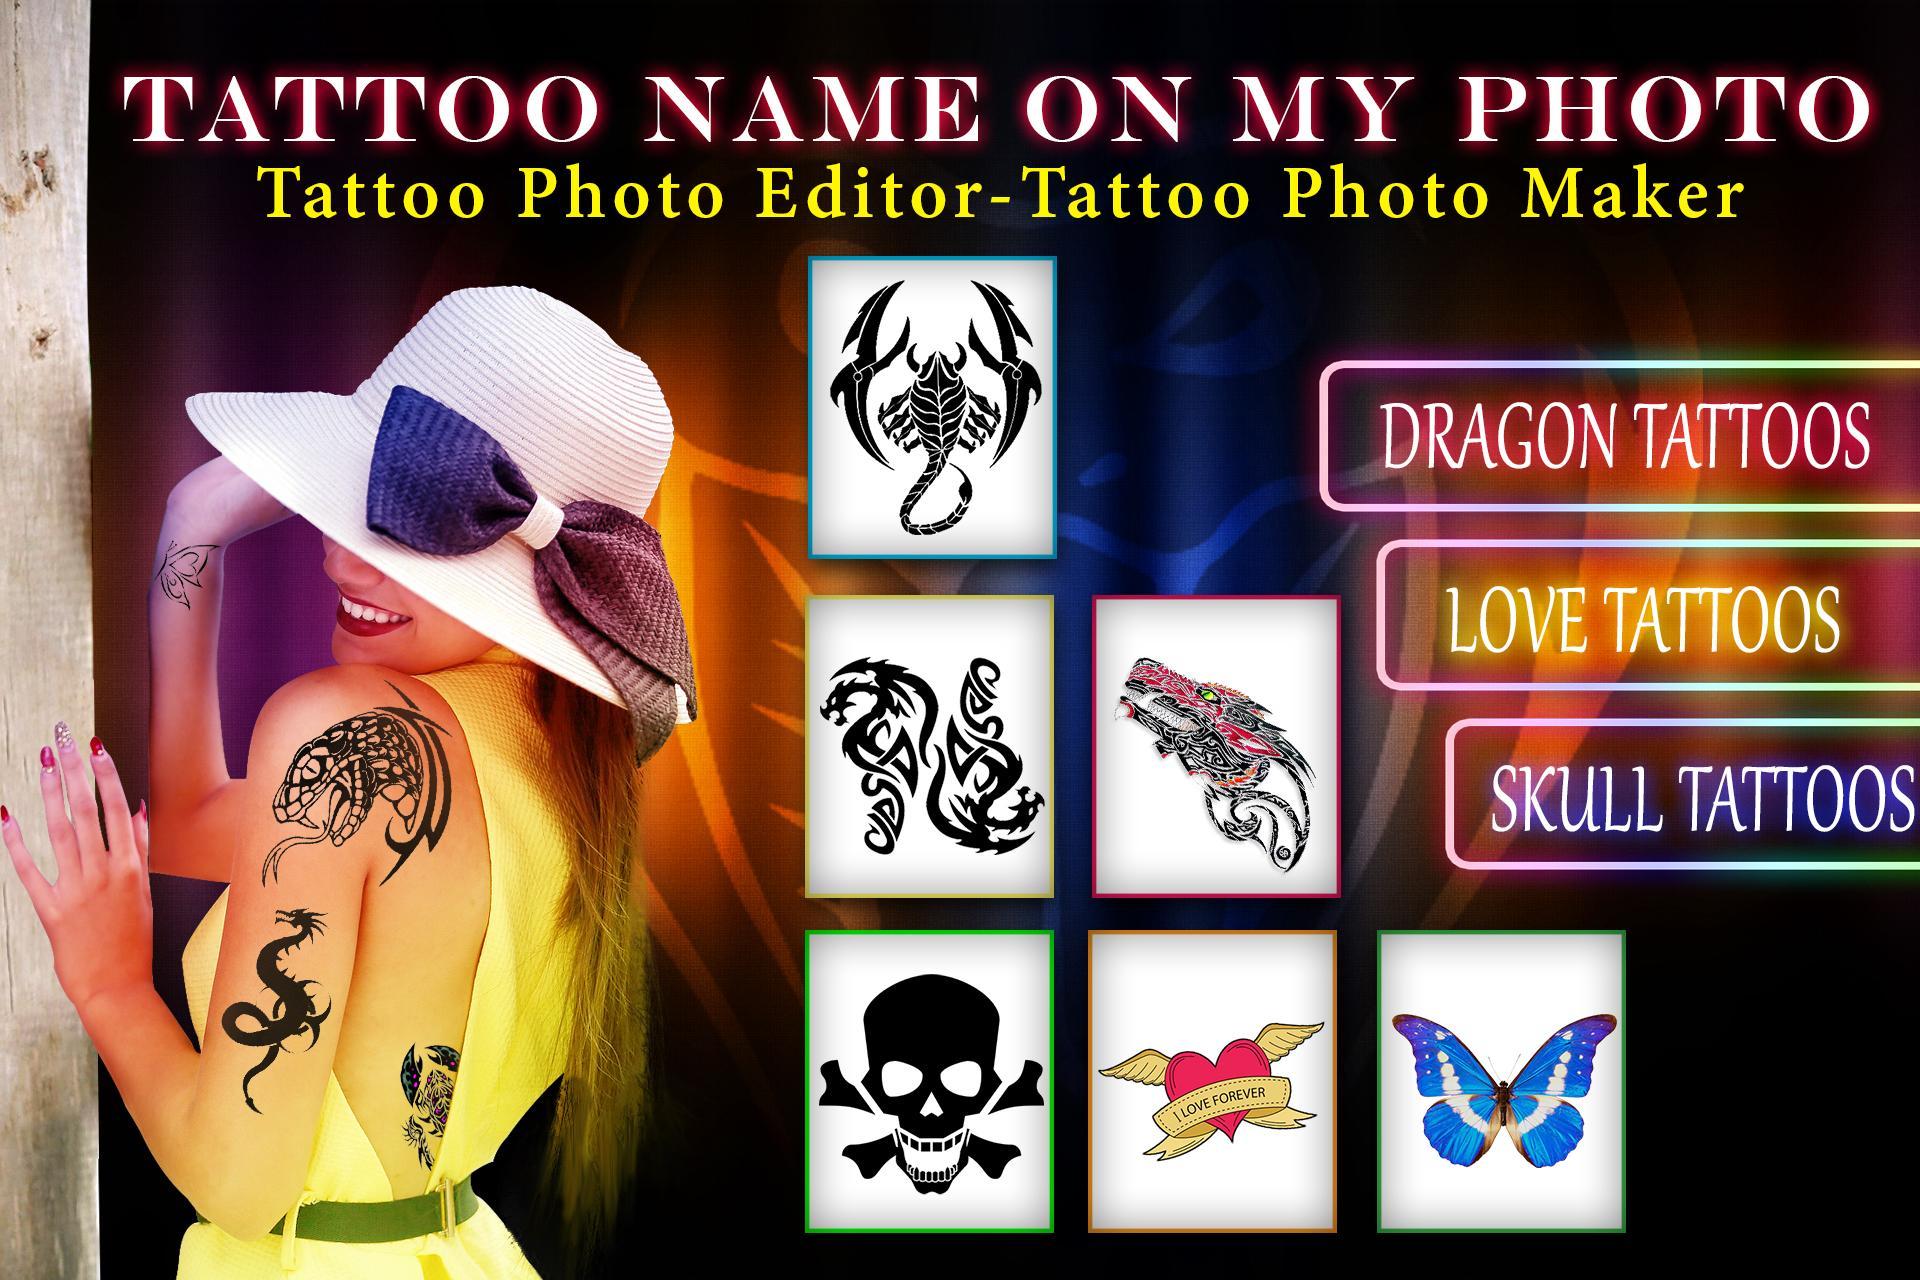 Tattoo Name on my Photo Editor : Tattoo maker for Android - APK Download